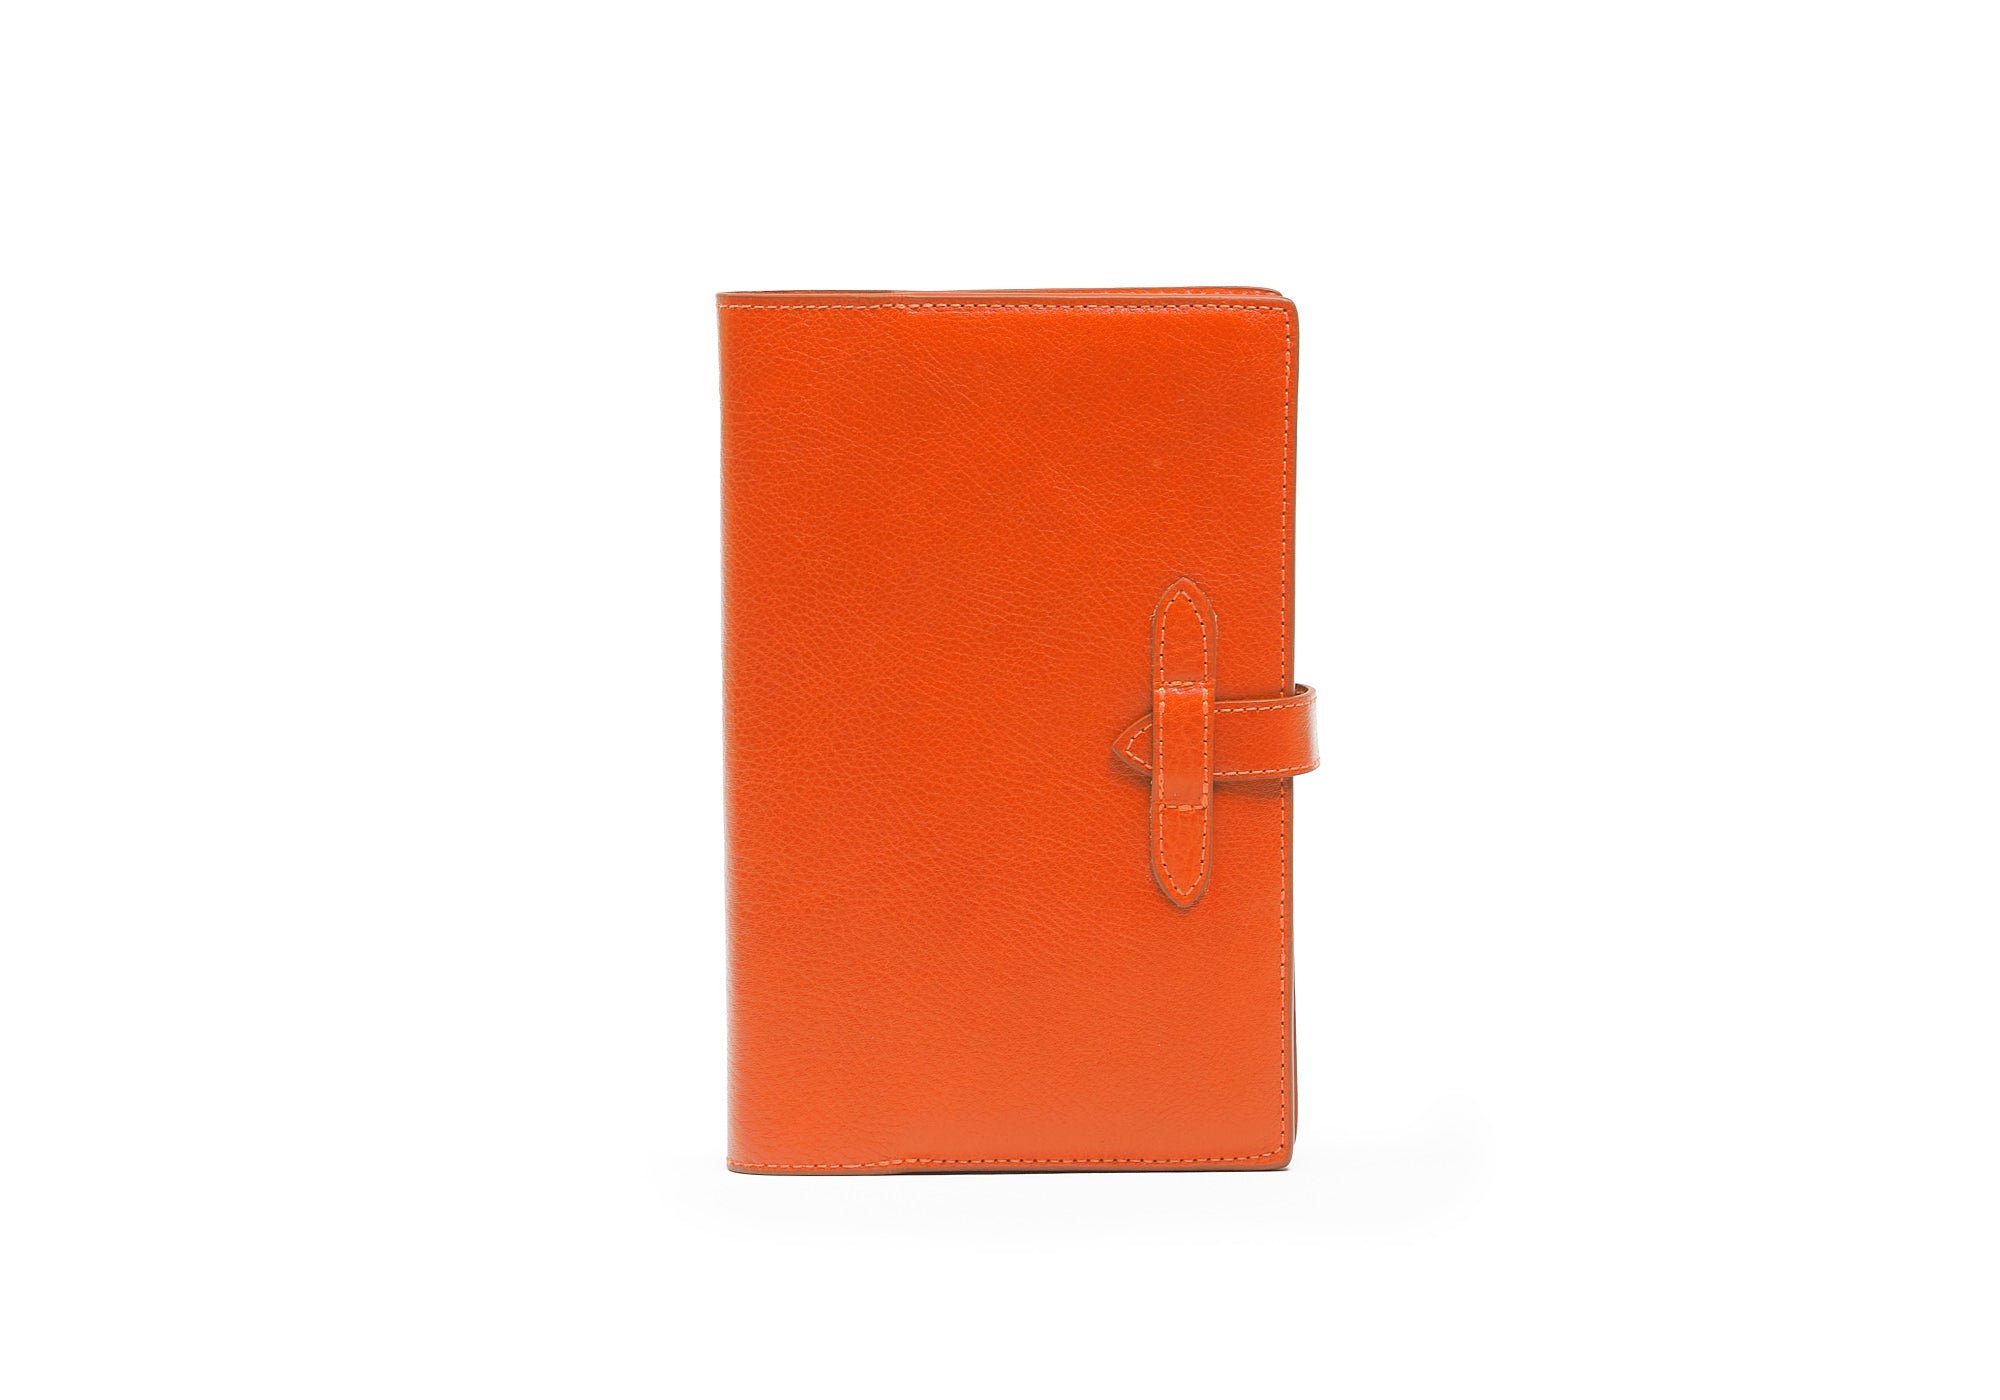 Front View of Leather Travel Journal Orange